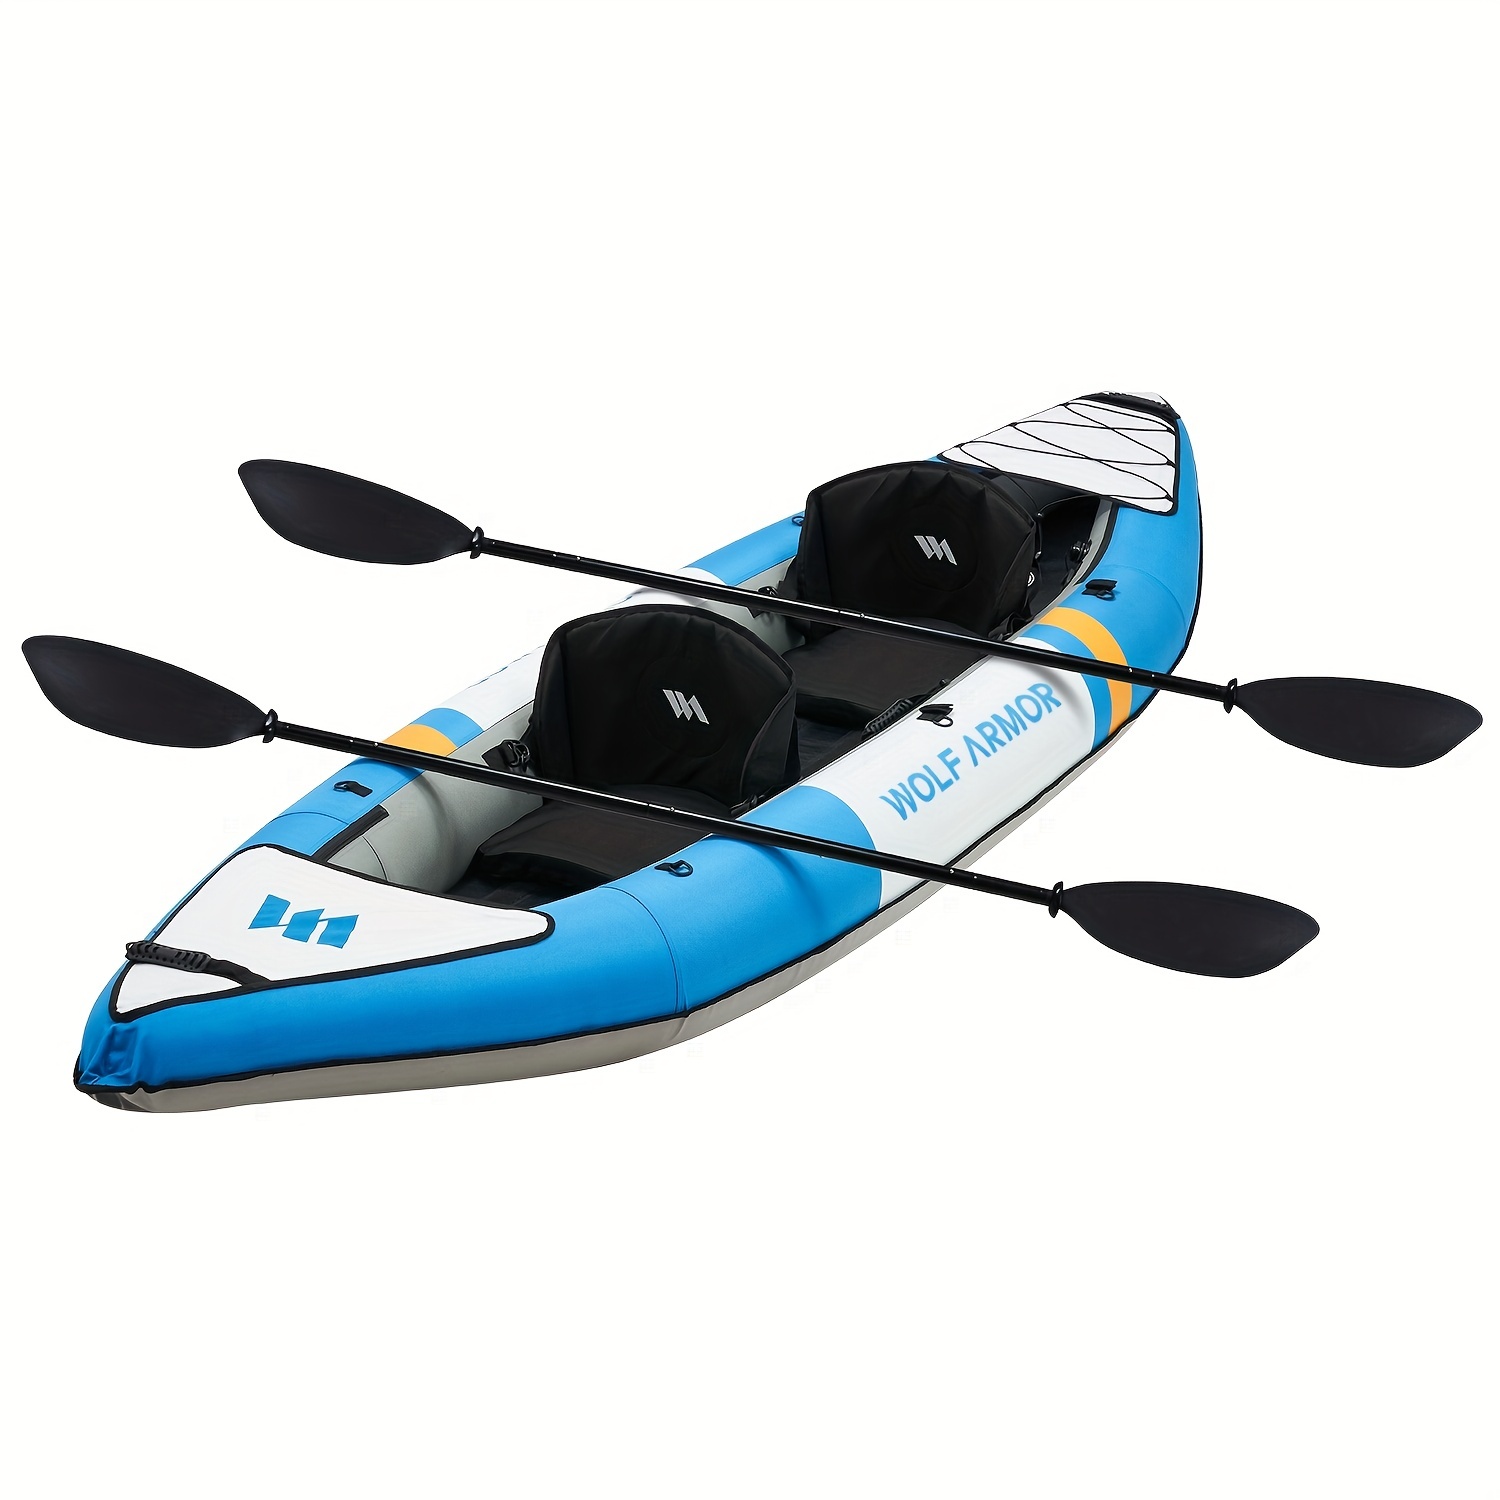 Inflatable Recreational Touring Kayak with EVA Padded Seats, 2 Person  Tandem Inflatable Kayak with All The Accessories, Lake, River, and Ocean  Kayaks